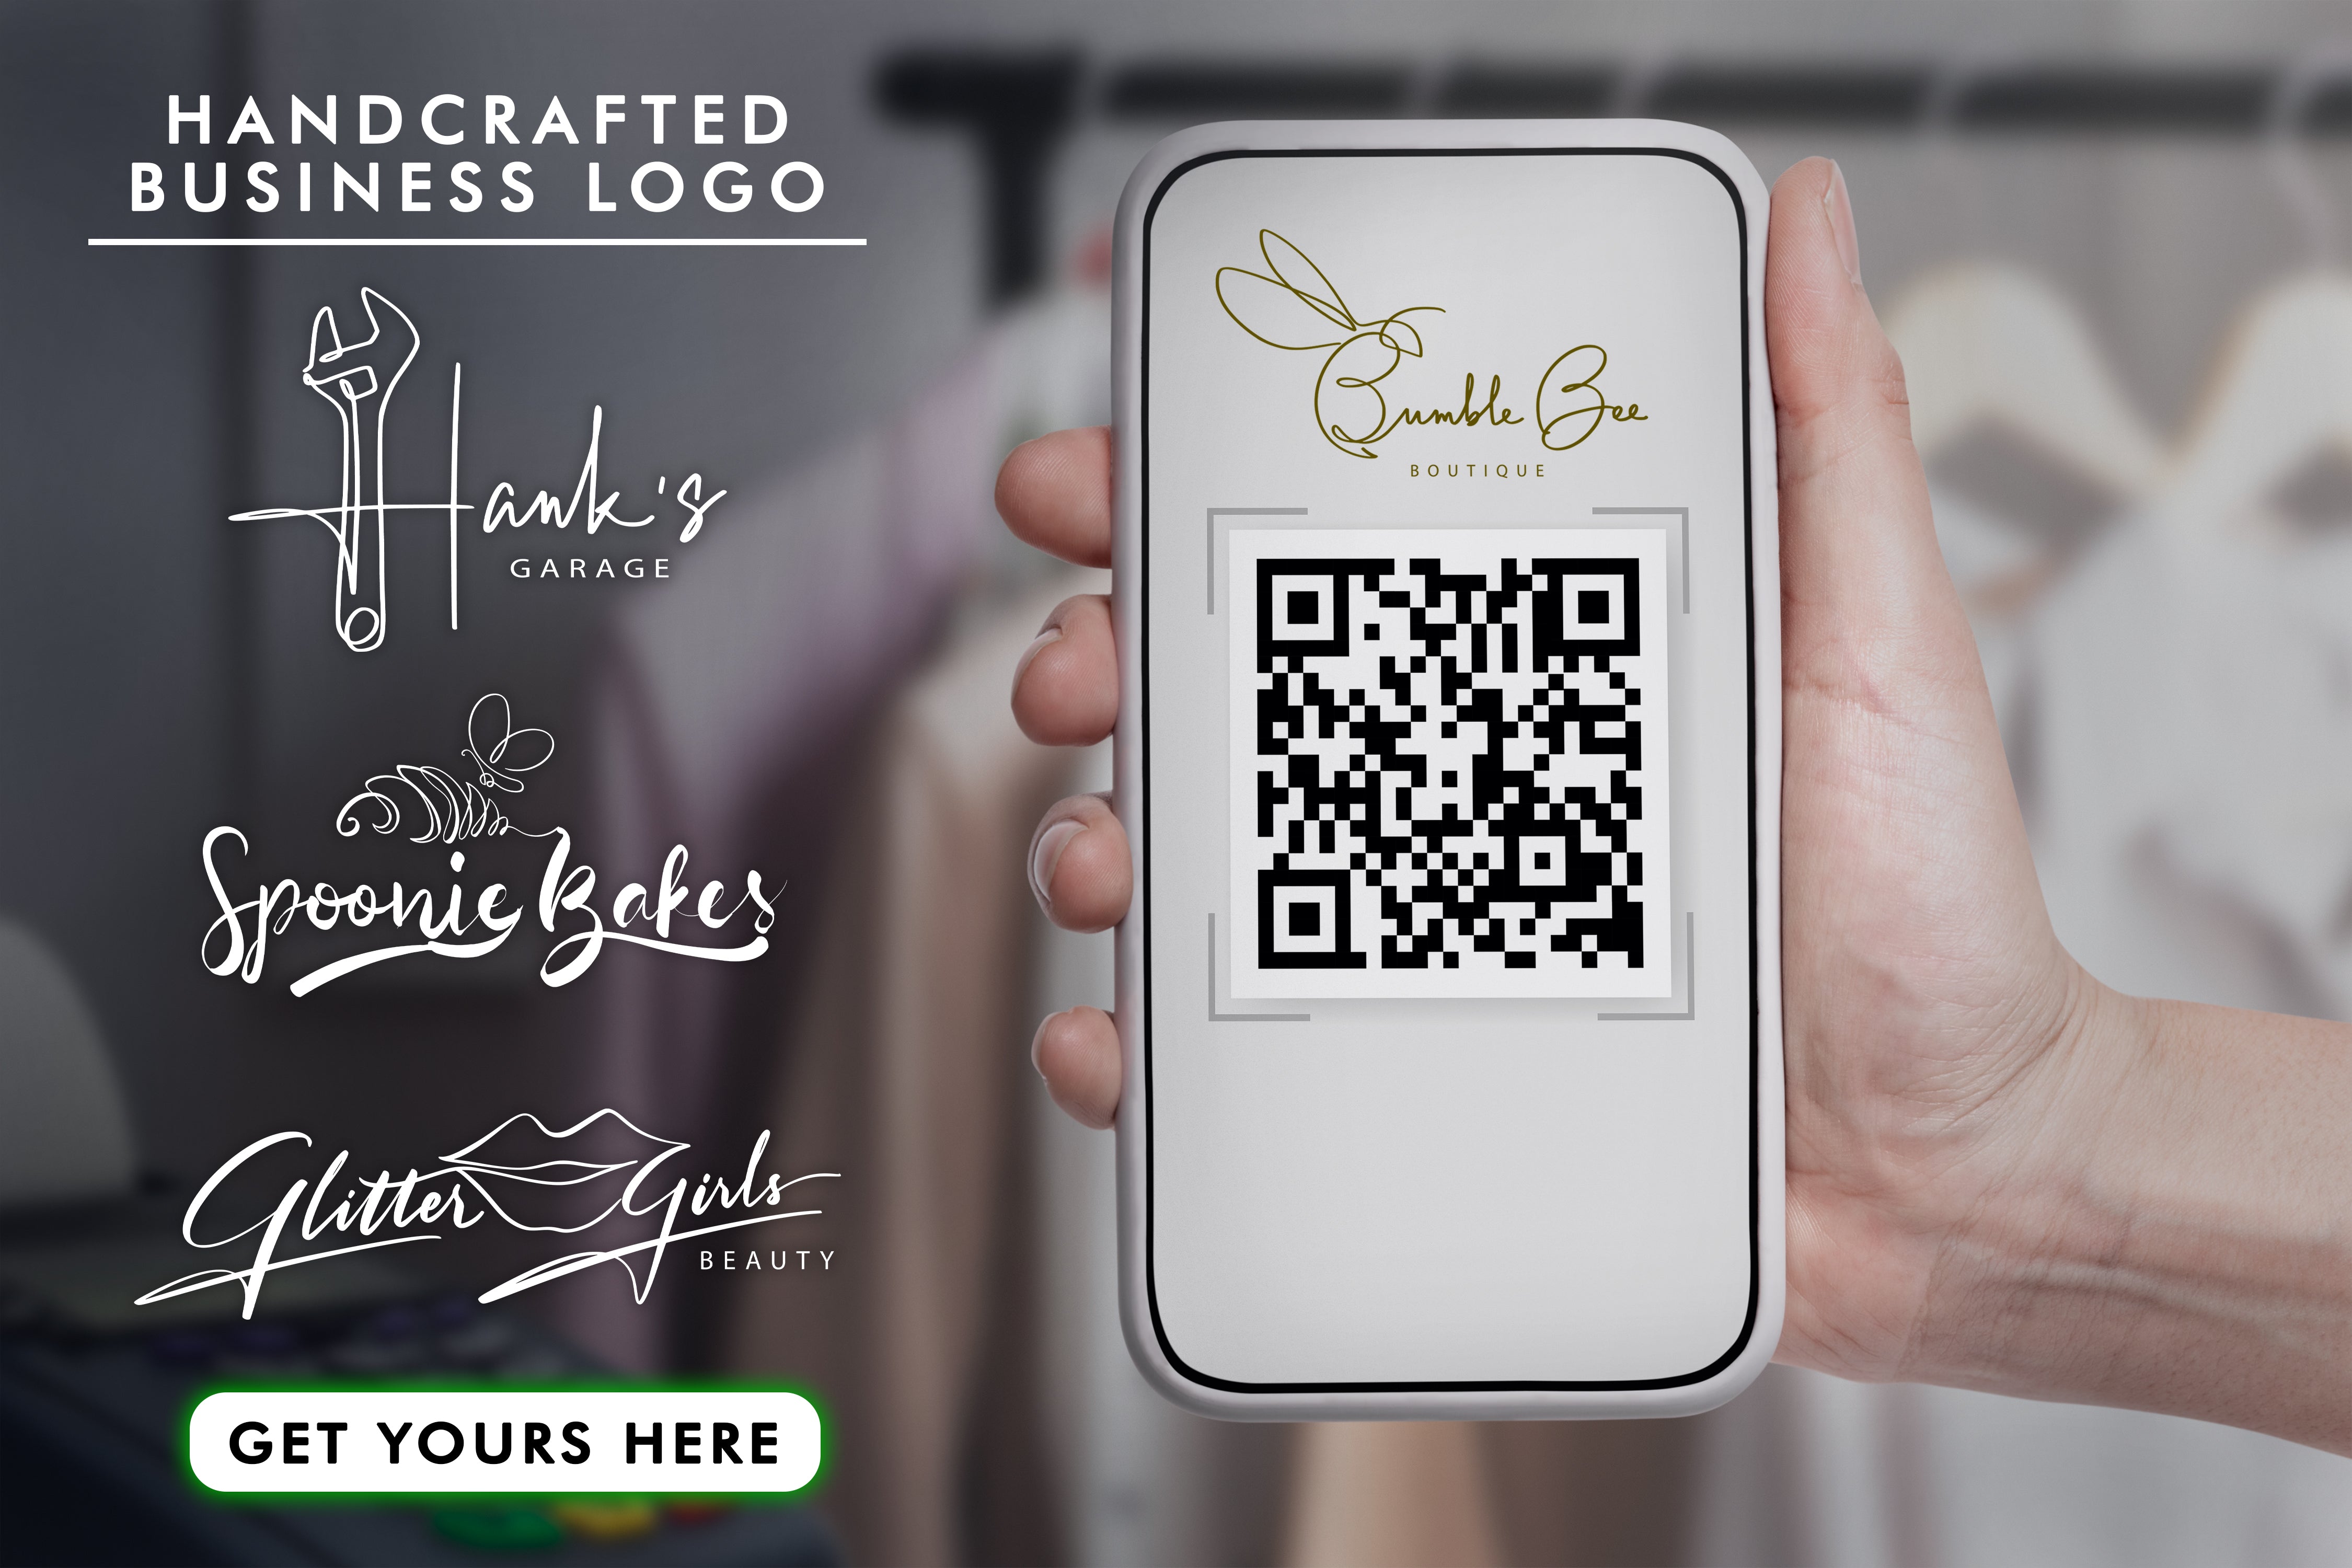 Discover the endless possibilities of qr code uses for marketing, business, and products. Improve efficiency and enhance customer experience.